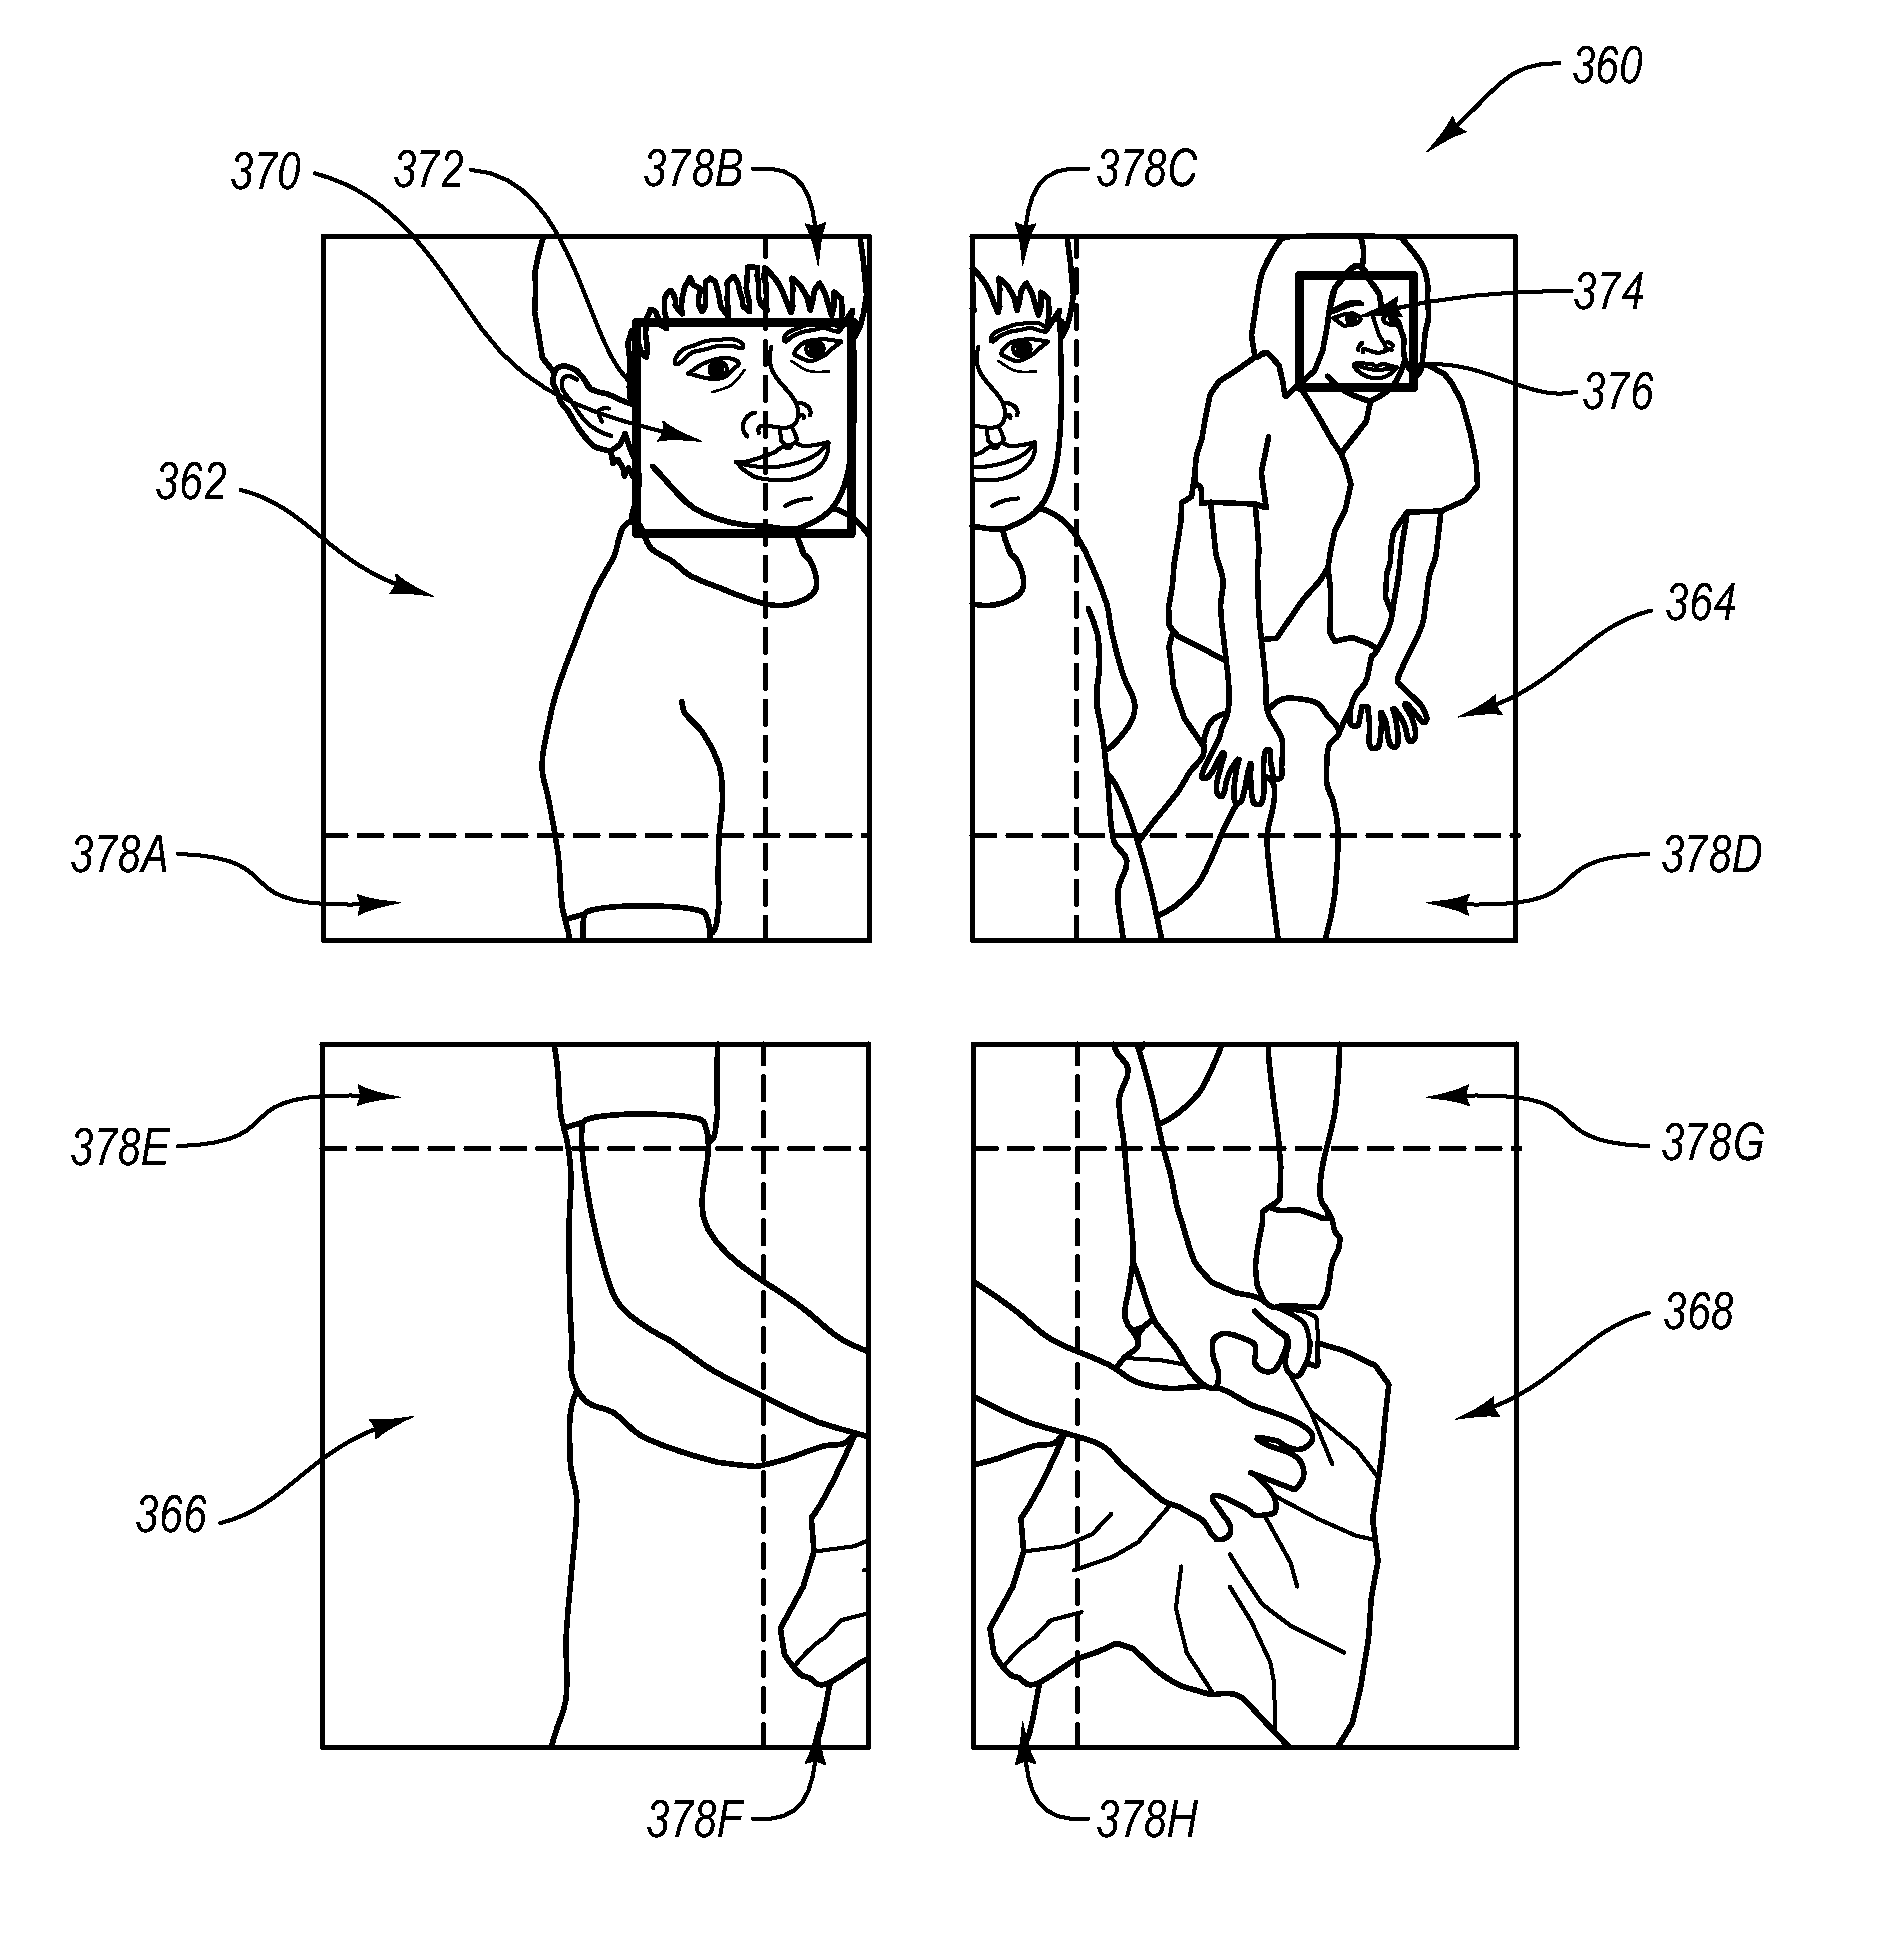 Two-level scanning for memory saving in image detection systems